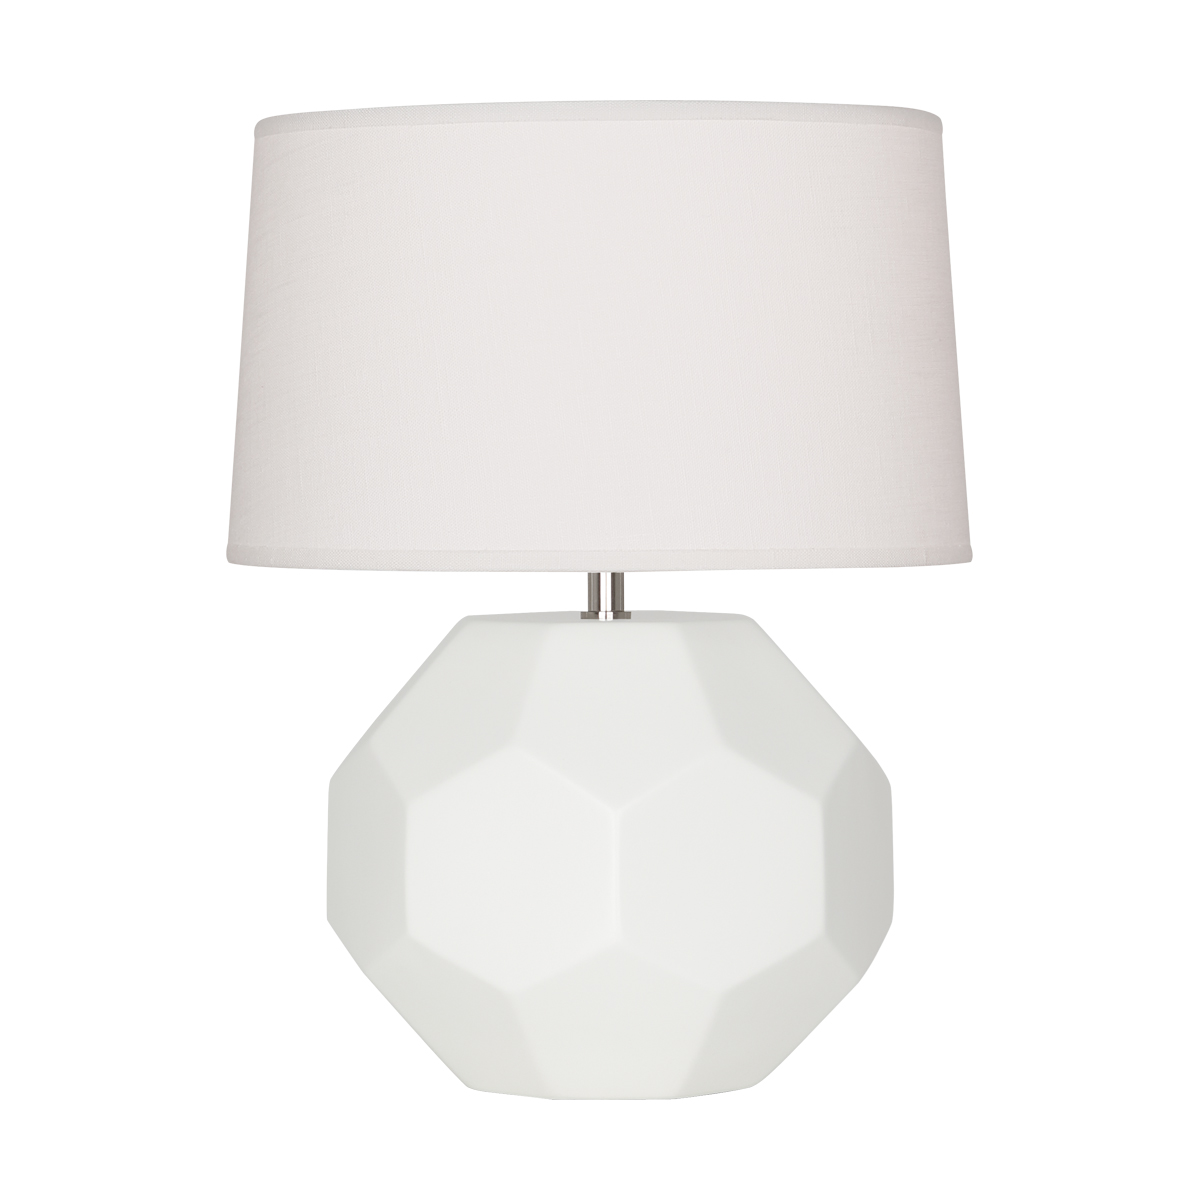 Franklin Accent Lamp Style #MLY02